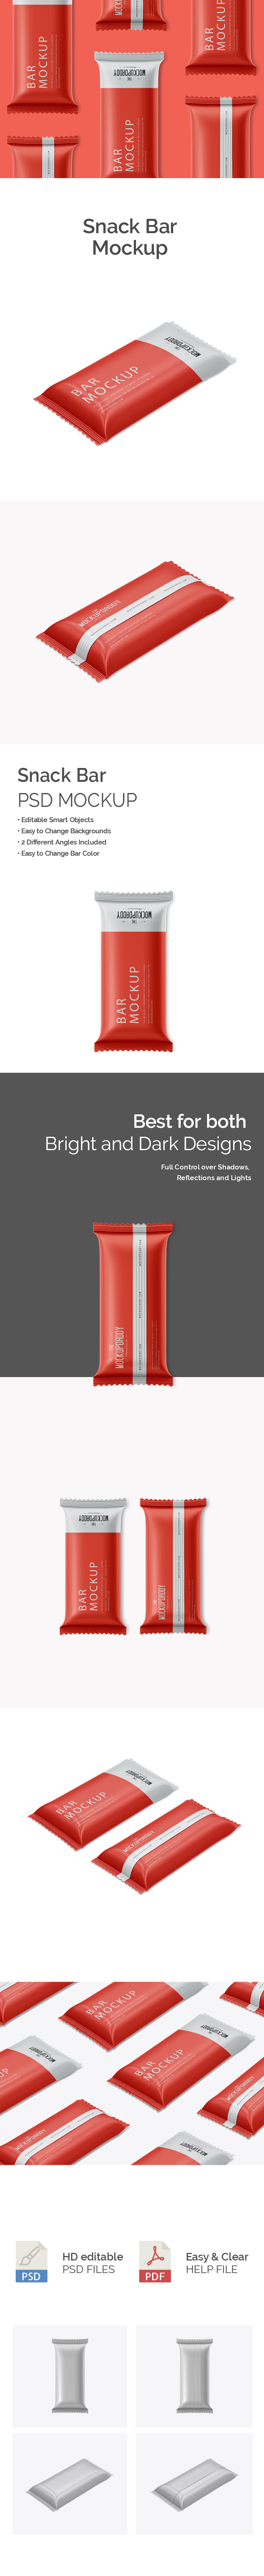 Snack Bar Mockup with customizable option and in red color.